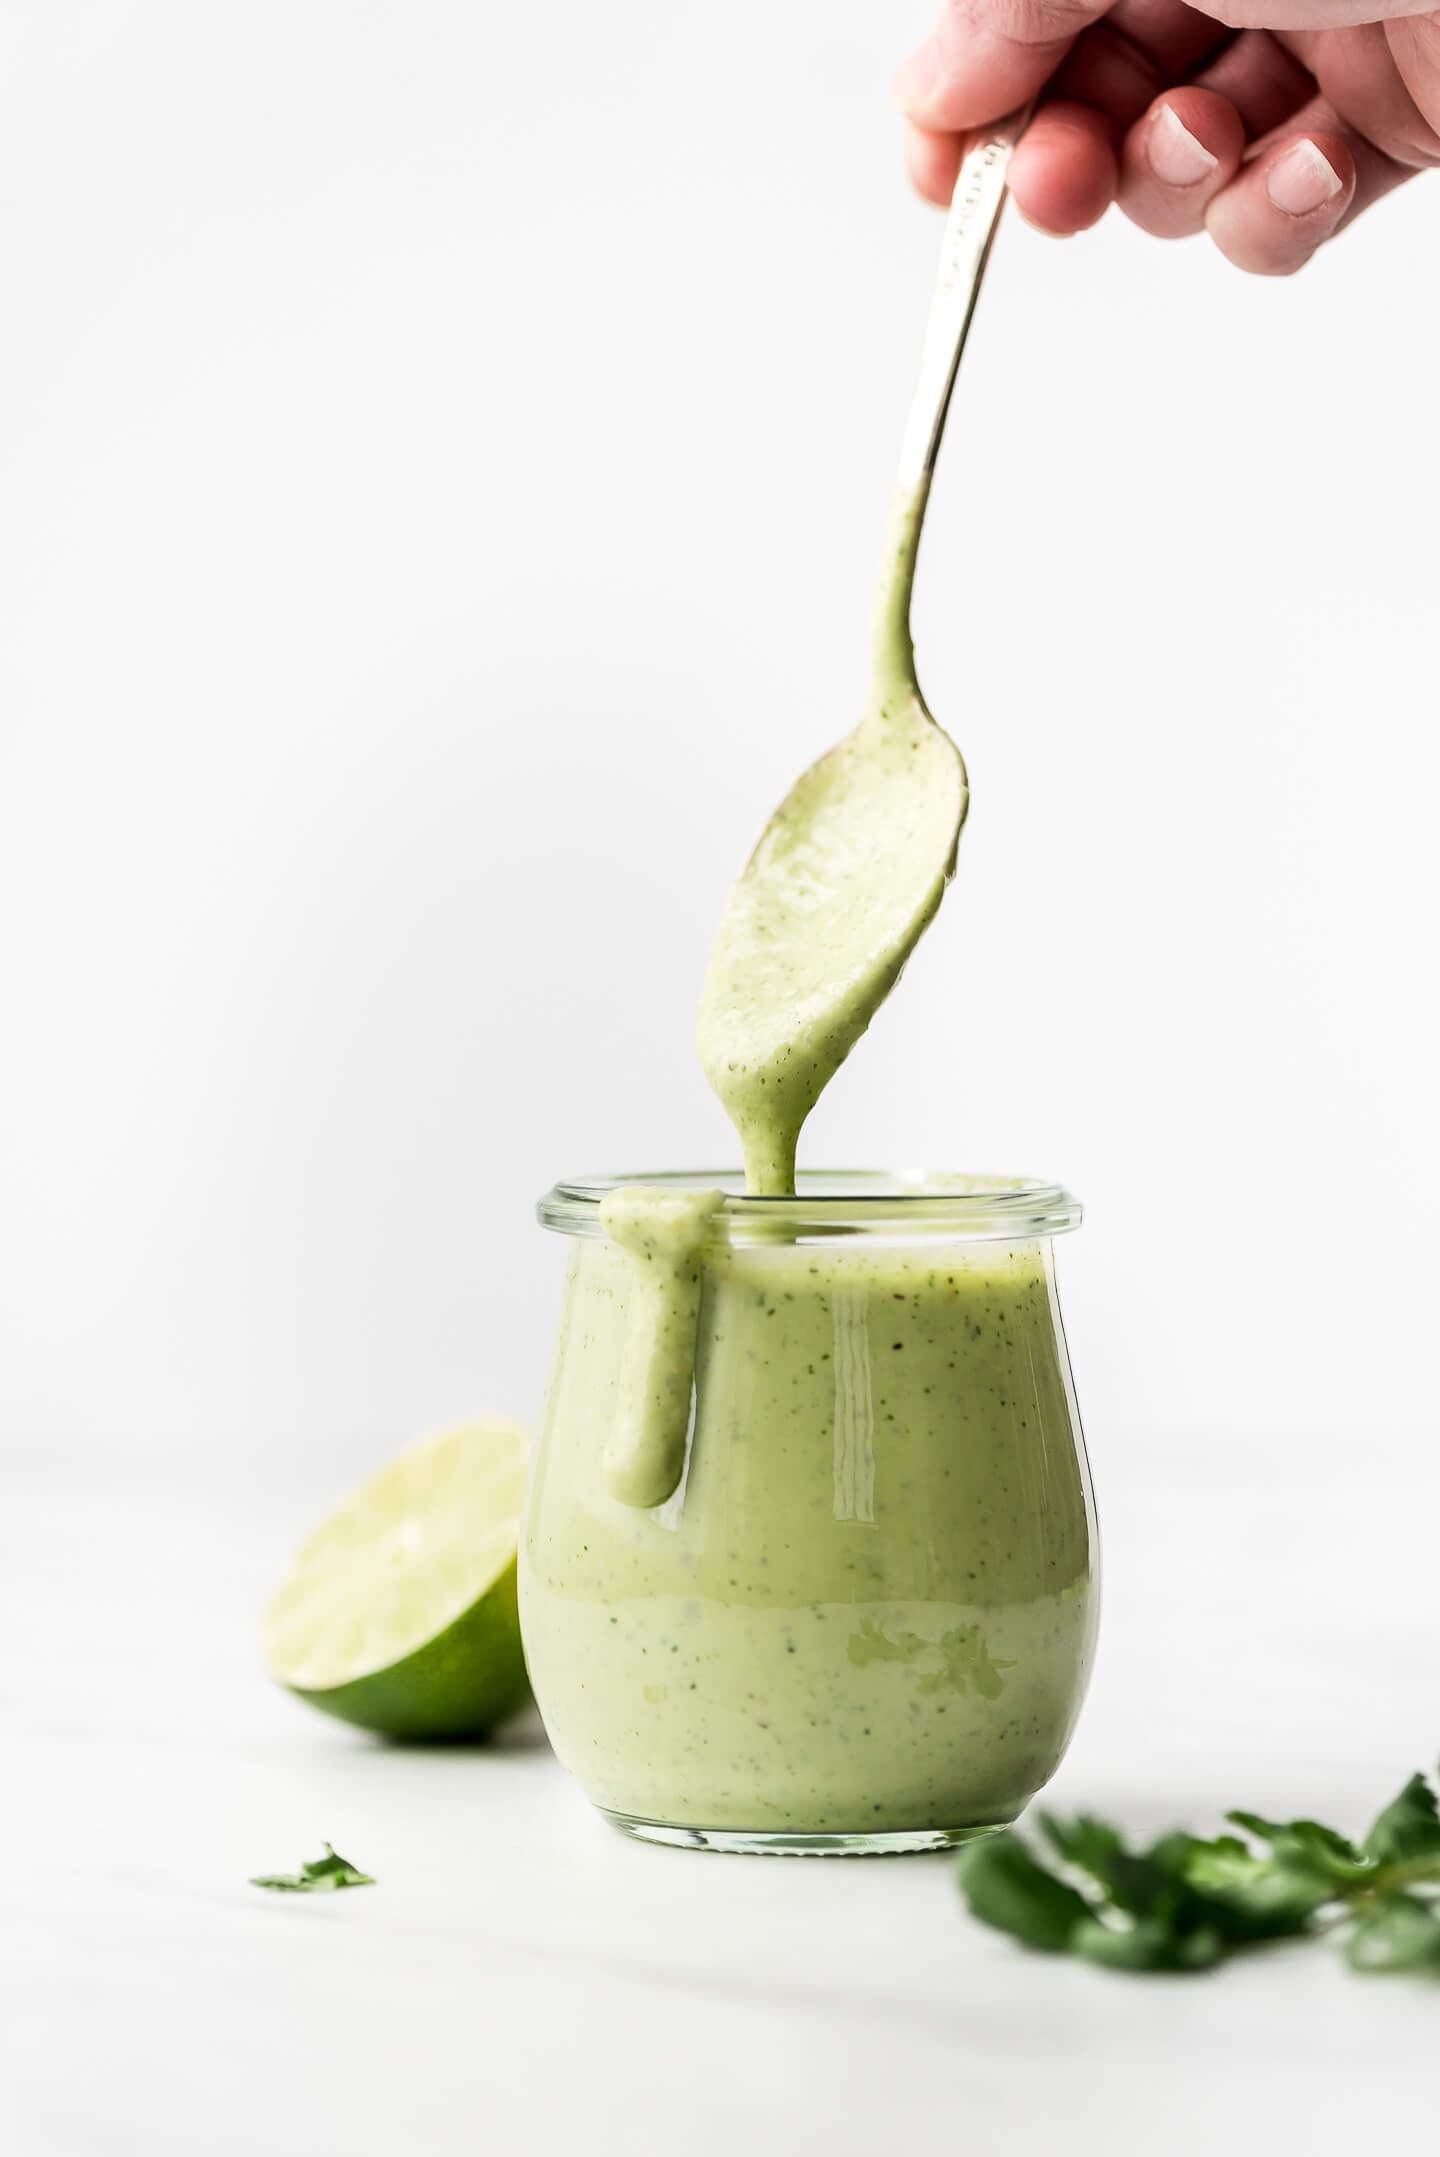 A hand lifting a spoon out of a jar of green dressing that has some dripping down the front of the jar.